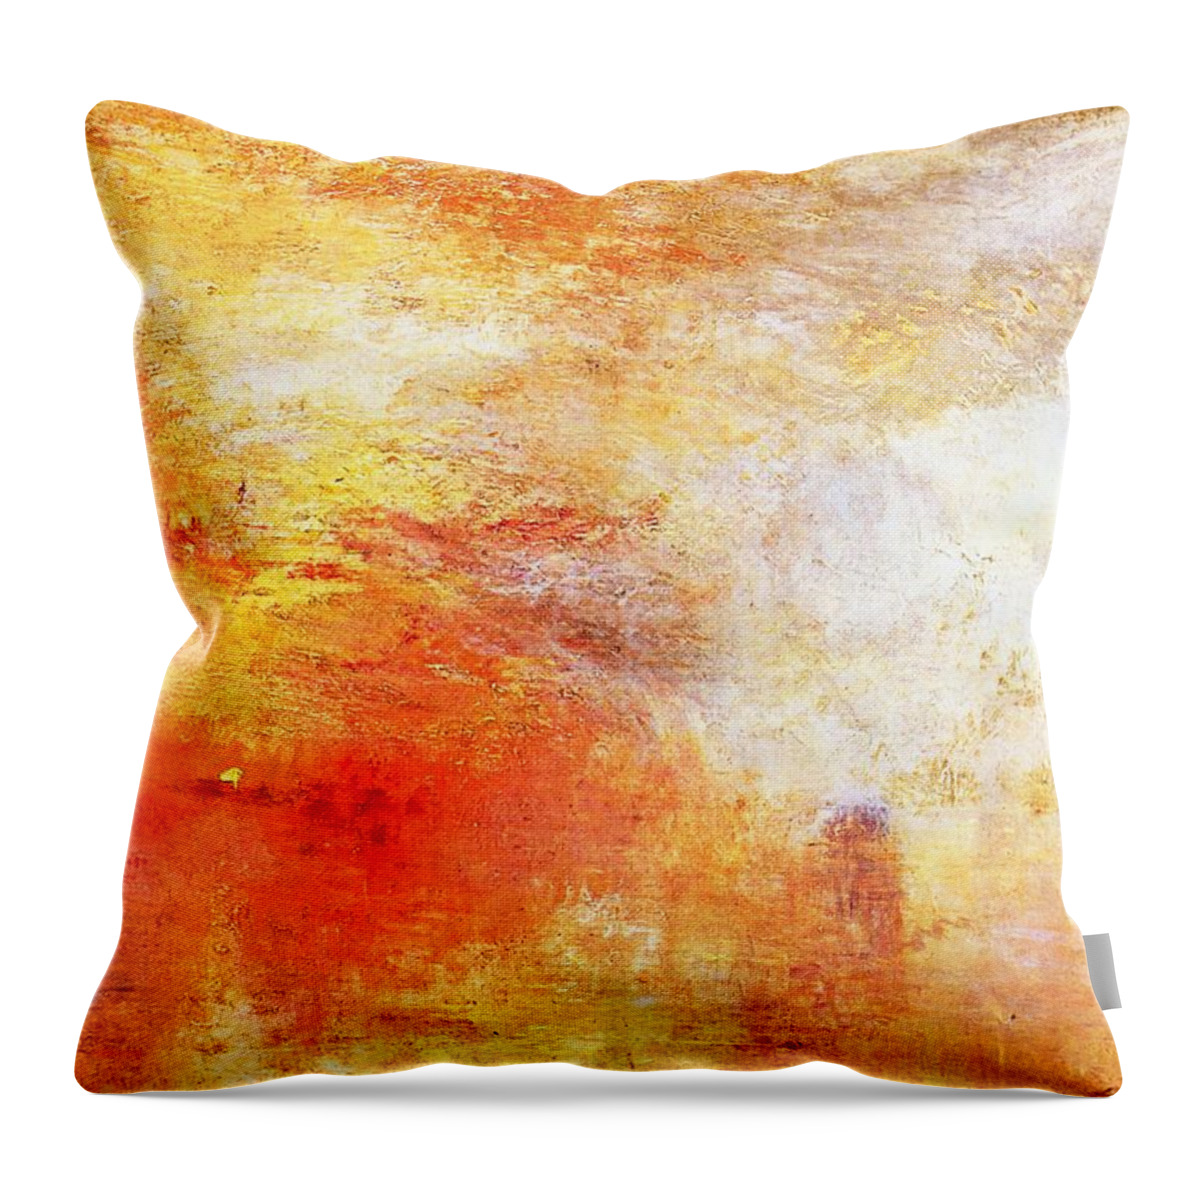 Joseph Mallord William Turner Throw Pillow featuring the painting Sun Setting Over A Lake by William Turner